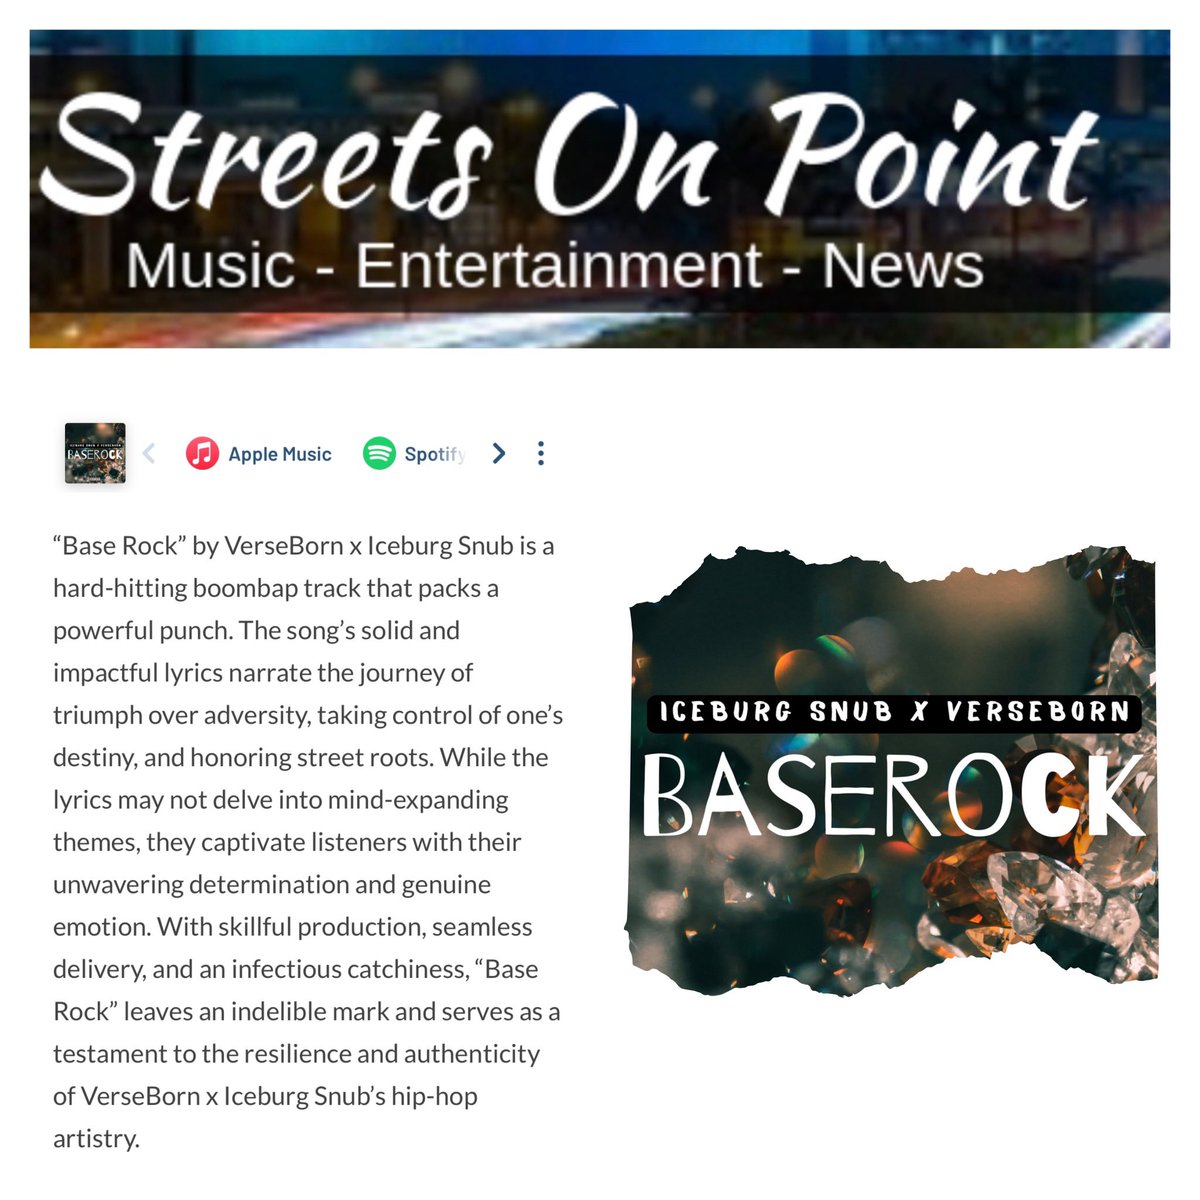 🫡💯 Salute to @streetsonpoint music blog for featuring “BASE ROCK” by #iceburgsnub x #verseborn!!

Follow @verseborn @iceburg_snub 

#eastcoast #westcoast #bos2dabay #boston #sanfrancisco #massachusetts #california #music #hiphop #boombap #explore #discover #new #boombap